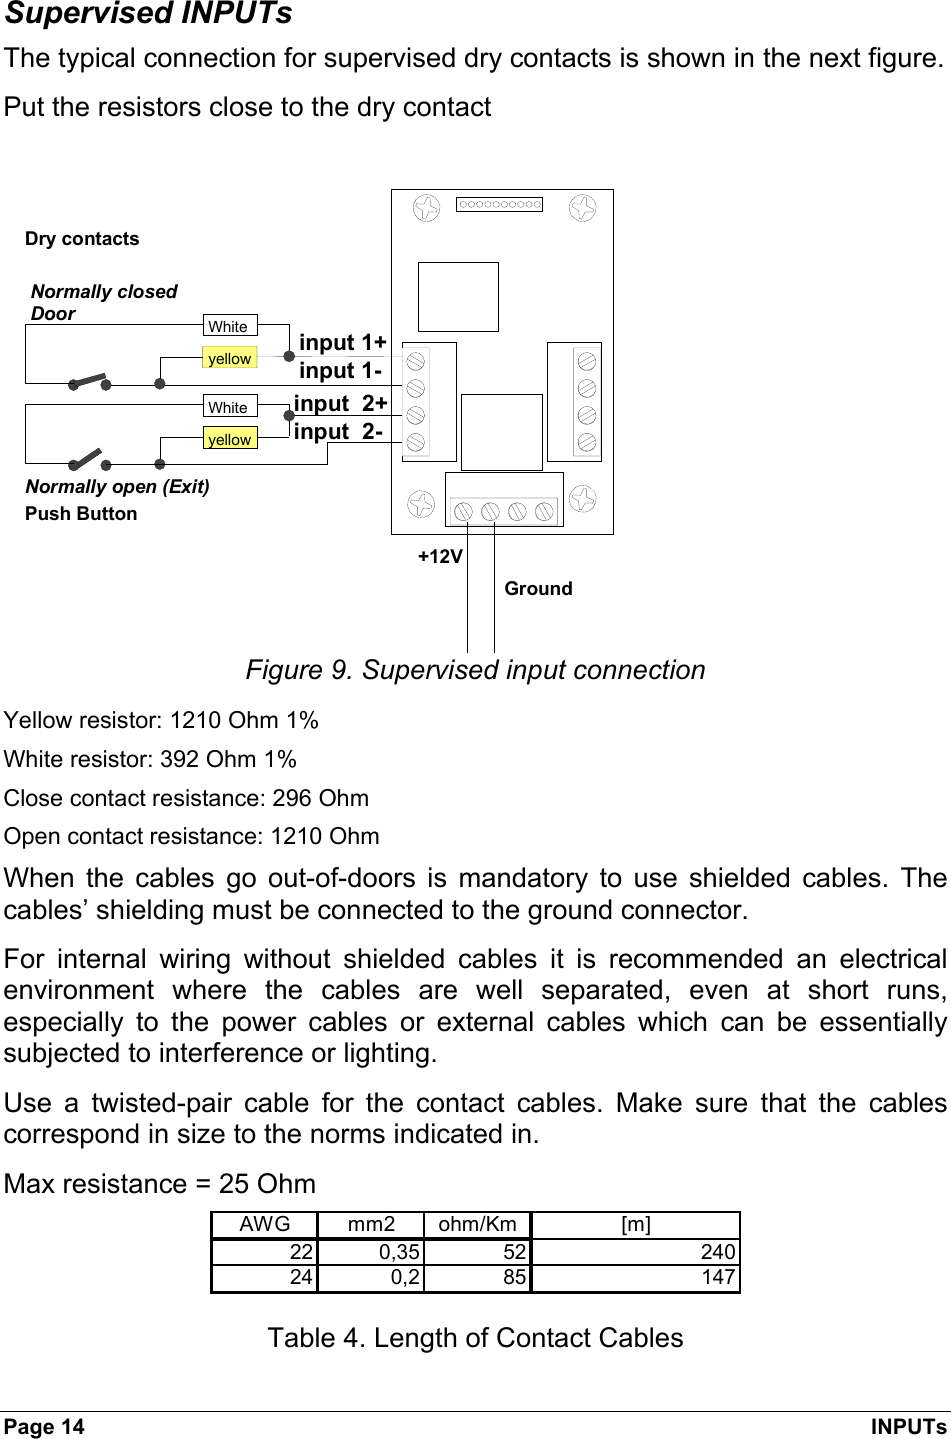 Page 14  INPUTs Supervised INPUTs The typical connection for supervised dry contacts is shown in the next figure. Put the resistors close to the dry contact  input 1+input 1-input  2+input  2-Normally closedDoorPush Button+12VGroundDry contactsNormally open (Exit)yellowyellowWhiteWhiteFigure 9. Supervised input connection Yellow resistor: 1210 Ohm 1% White resistor: 392 Ohm 1% Close contact resistance: 296 Ohm Open contact resistance: 1210 Ohm When the cables go out-of-doors is mandatory to use shielded cables. The cables’ shielding must be connected to the ground connector. For internal wiring without shielded cables it is recommended an electrical environment where the cables are well separated, even at short runs, especially to the power cables or external cables which can be essentially subjected to interference or lighting. Use a twisted-pair cable for the contact cables. Make sure that the cables correspond in size to the norms indicated in. Max resistance = 25 Ohm AWG mm2 ohm/Km [m]22 0,35 52 24024 0,2 85 147   Table 4. Length of Contact Cables 